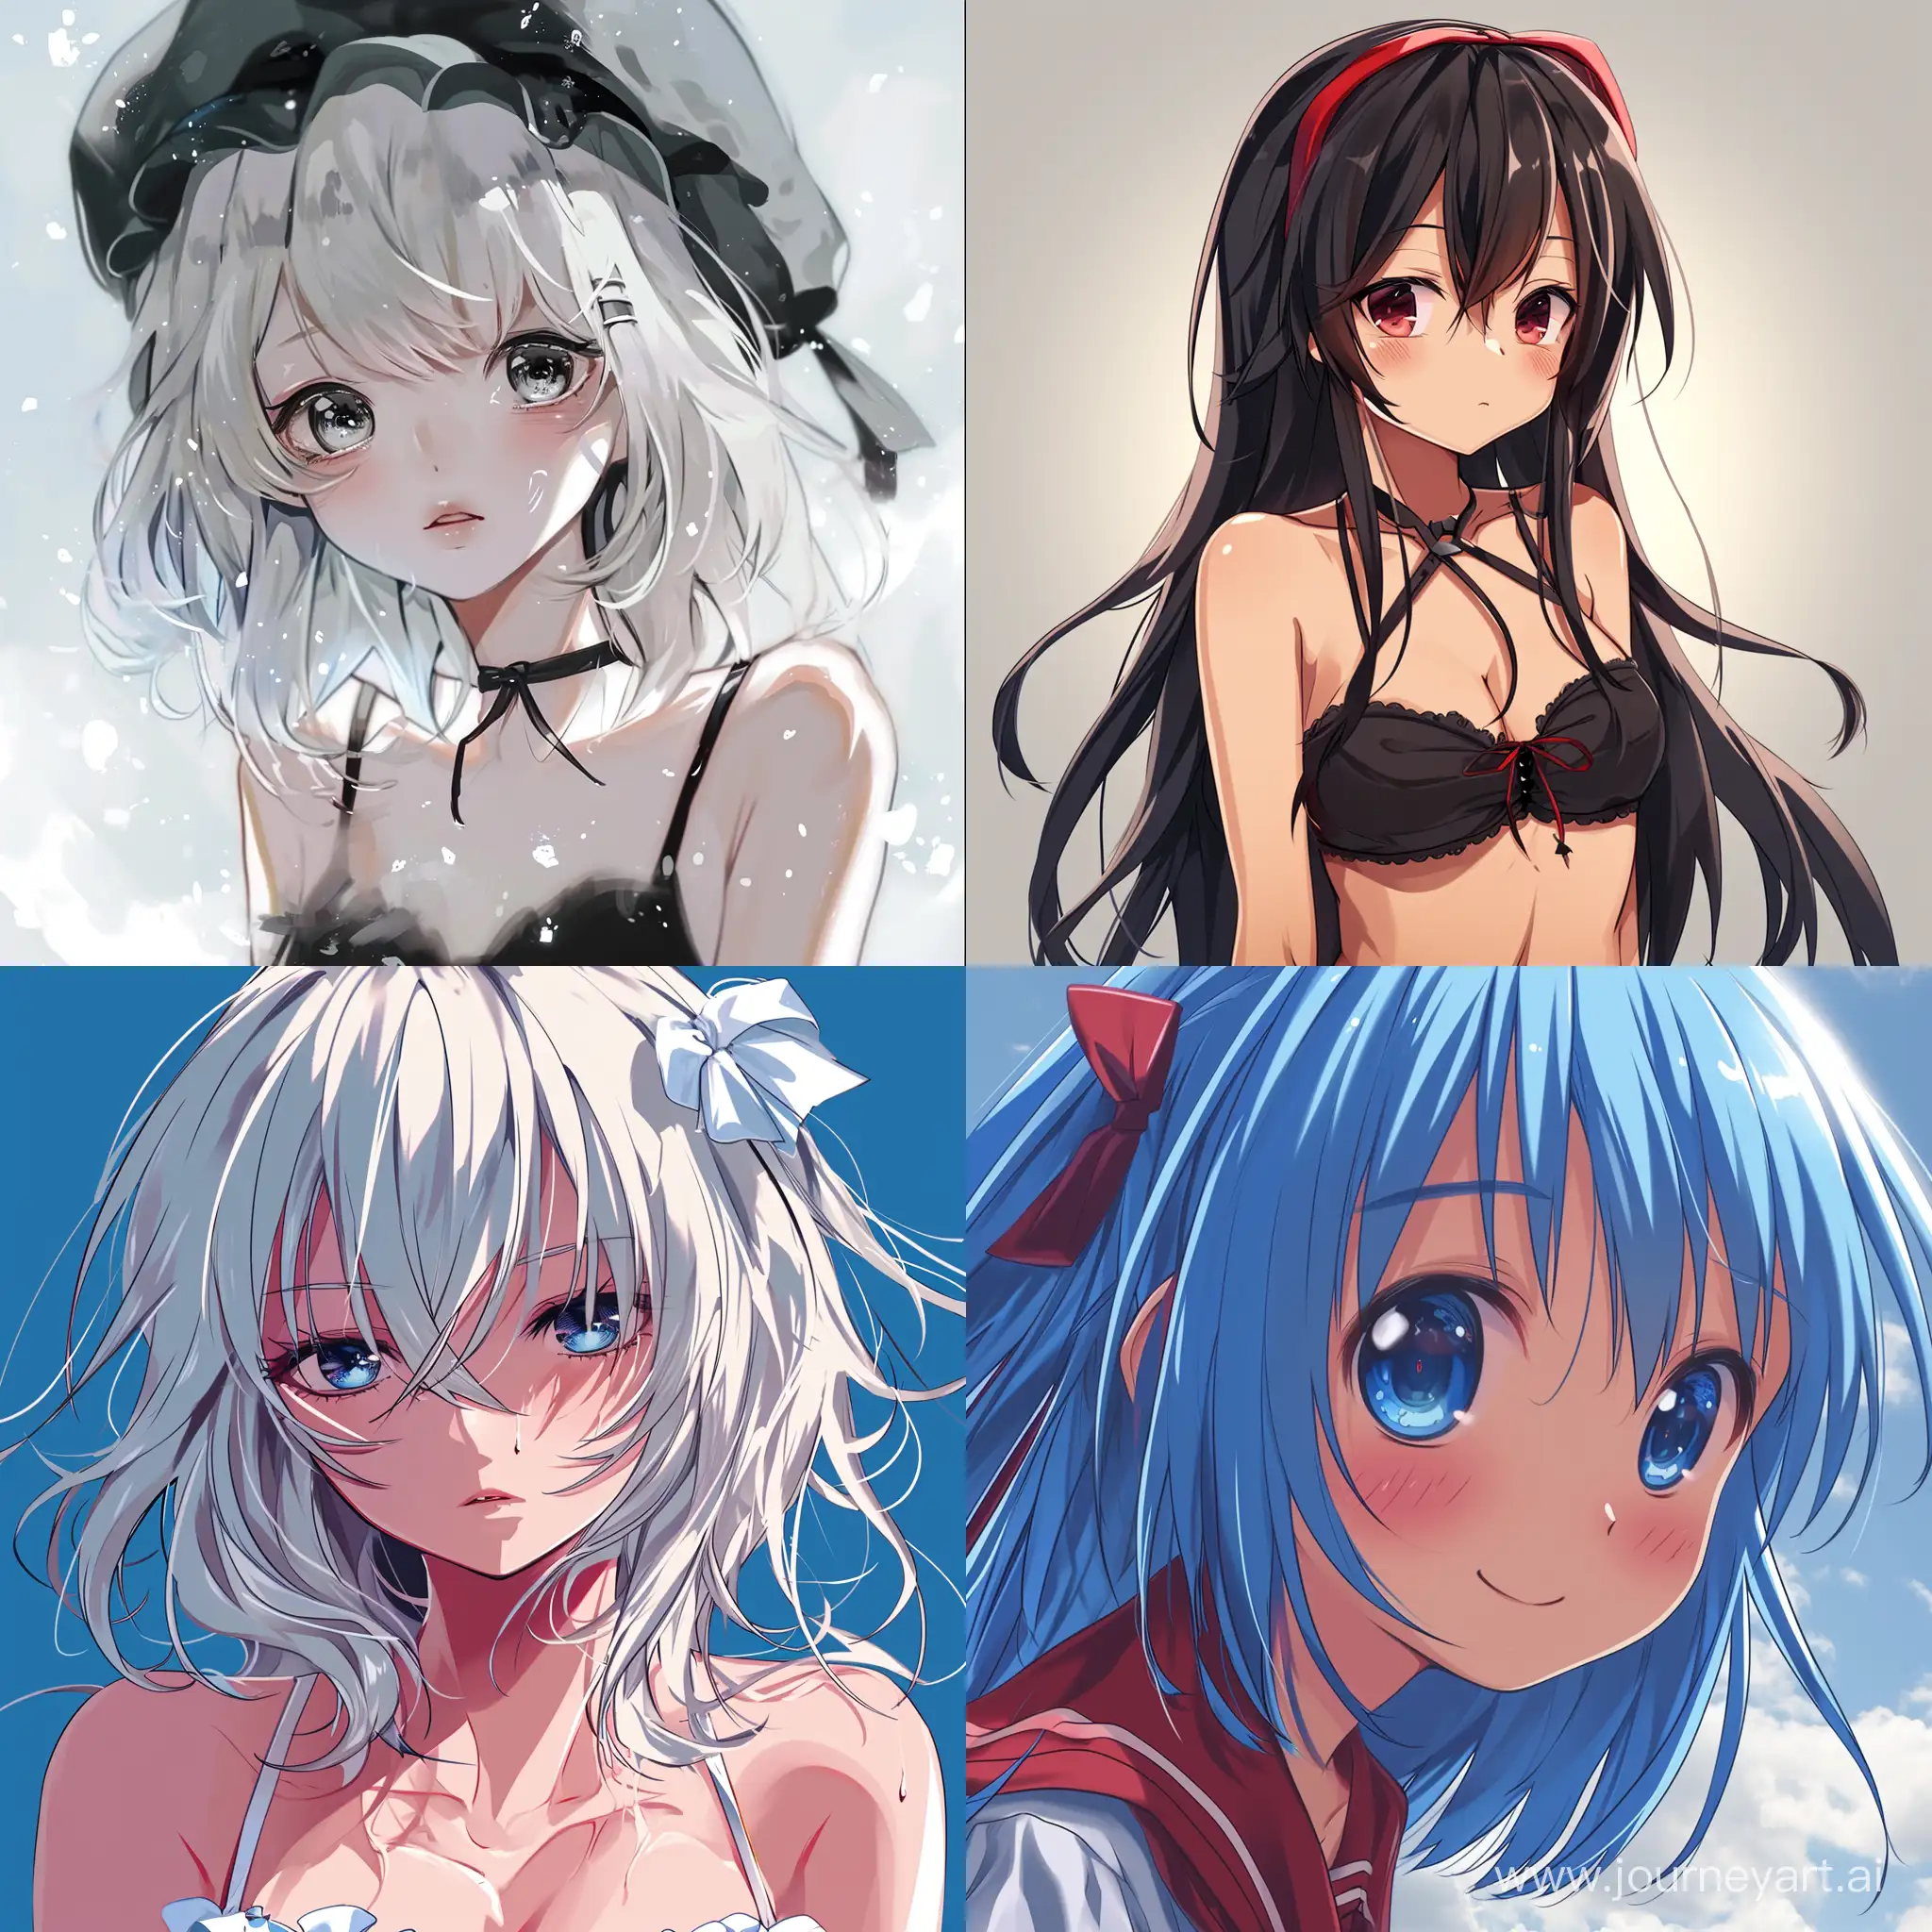 Cute-Anime-Girl-with-Version-6-Art-and-Square-Aspect-Ratio